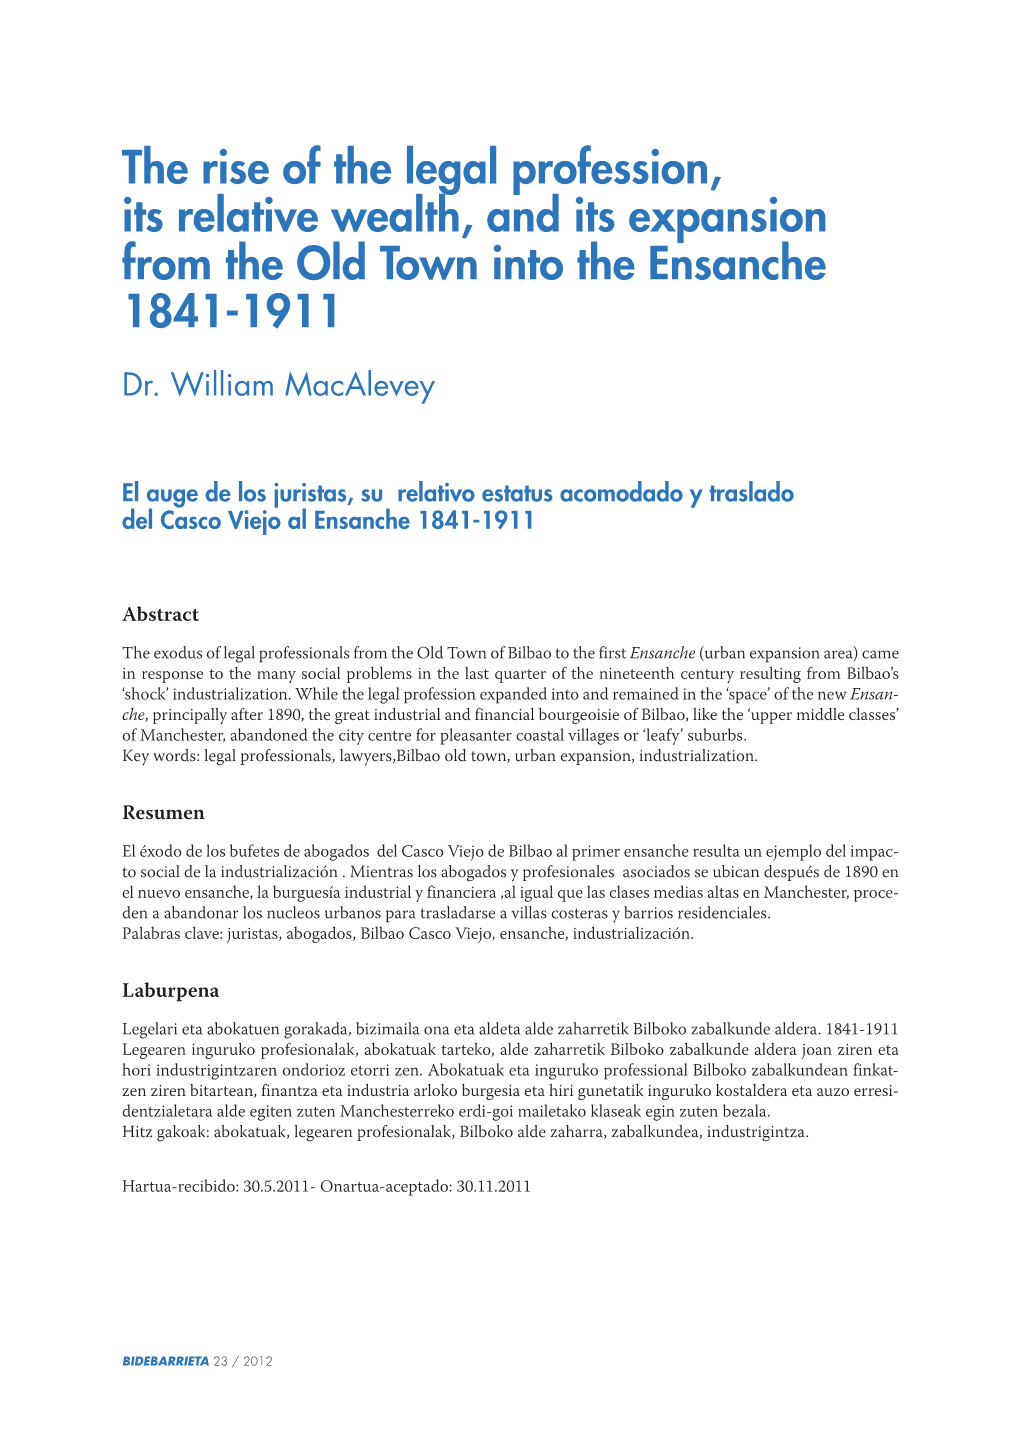 The Rise of the Legal Profession, Its Relative Wealth, and Its Expansion from the Old Town Into the Ensanche 1841-1911